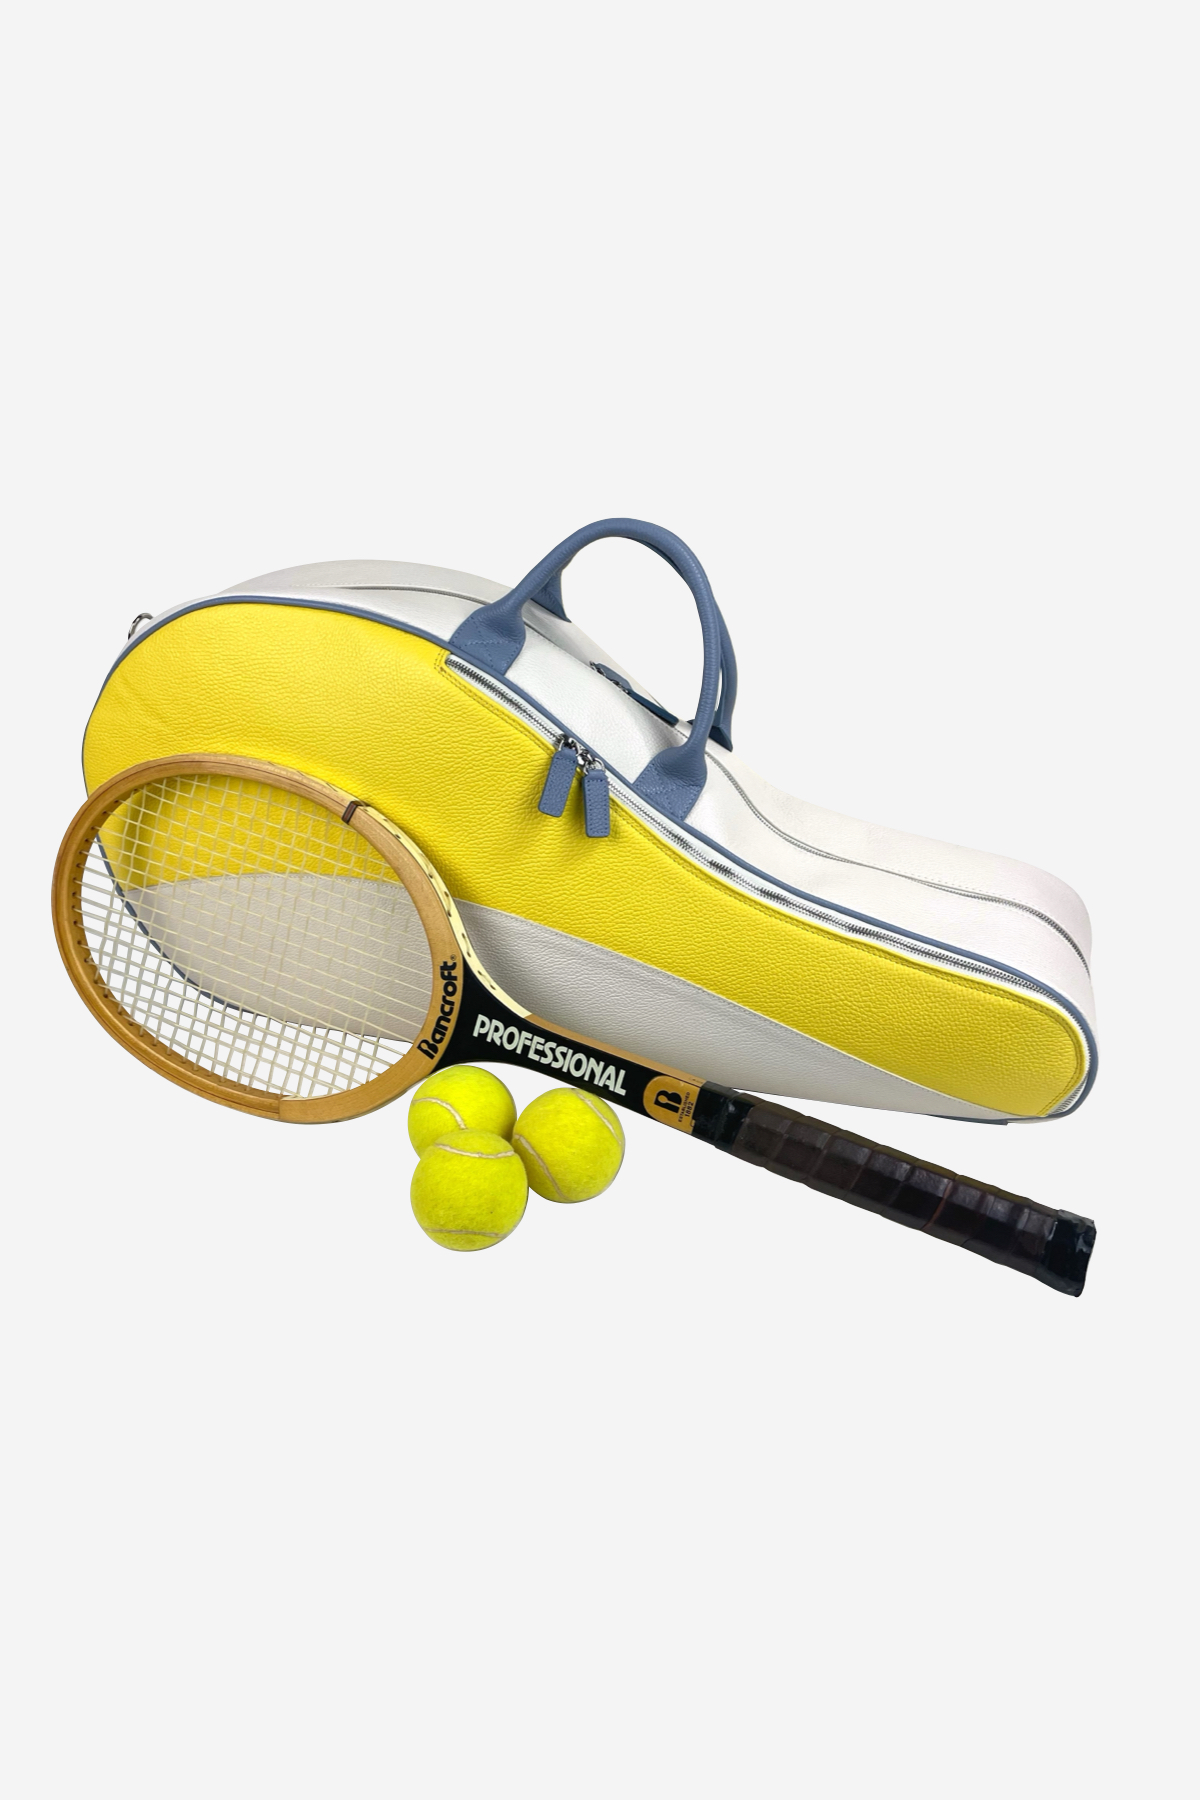 Paddle Tennis Racquet Cover: Personalized Bags And Purses Handmade